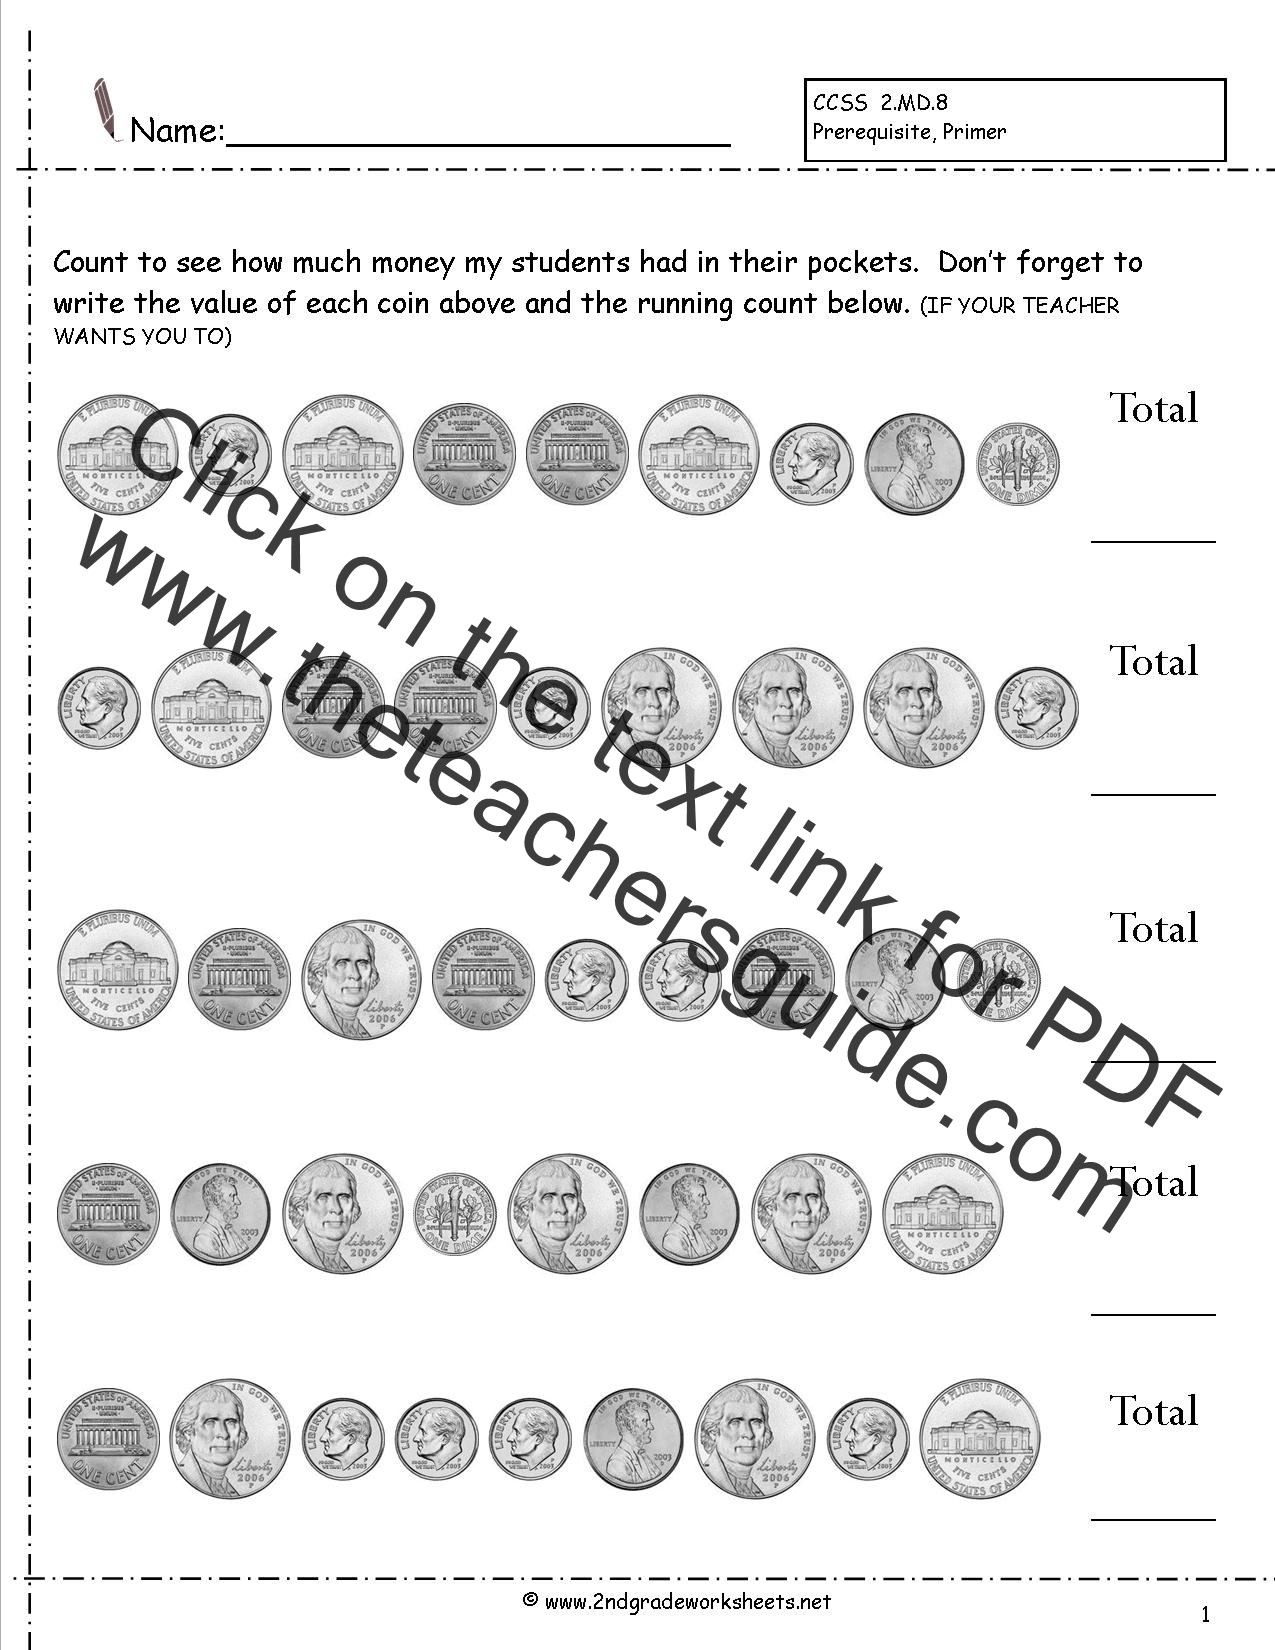 Free Printable Counting Money Worksheets For 2nd Grade ...